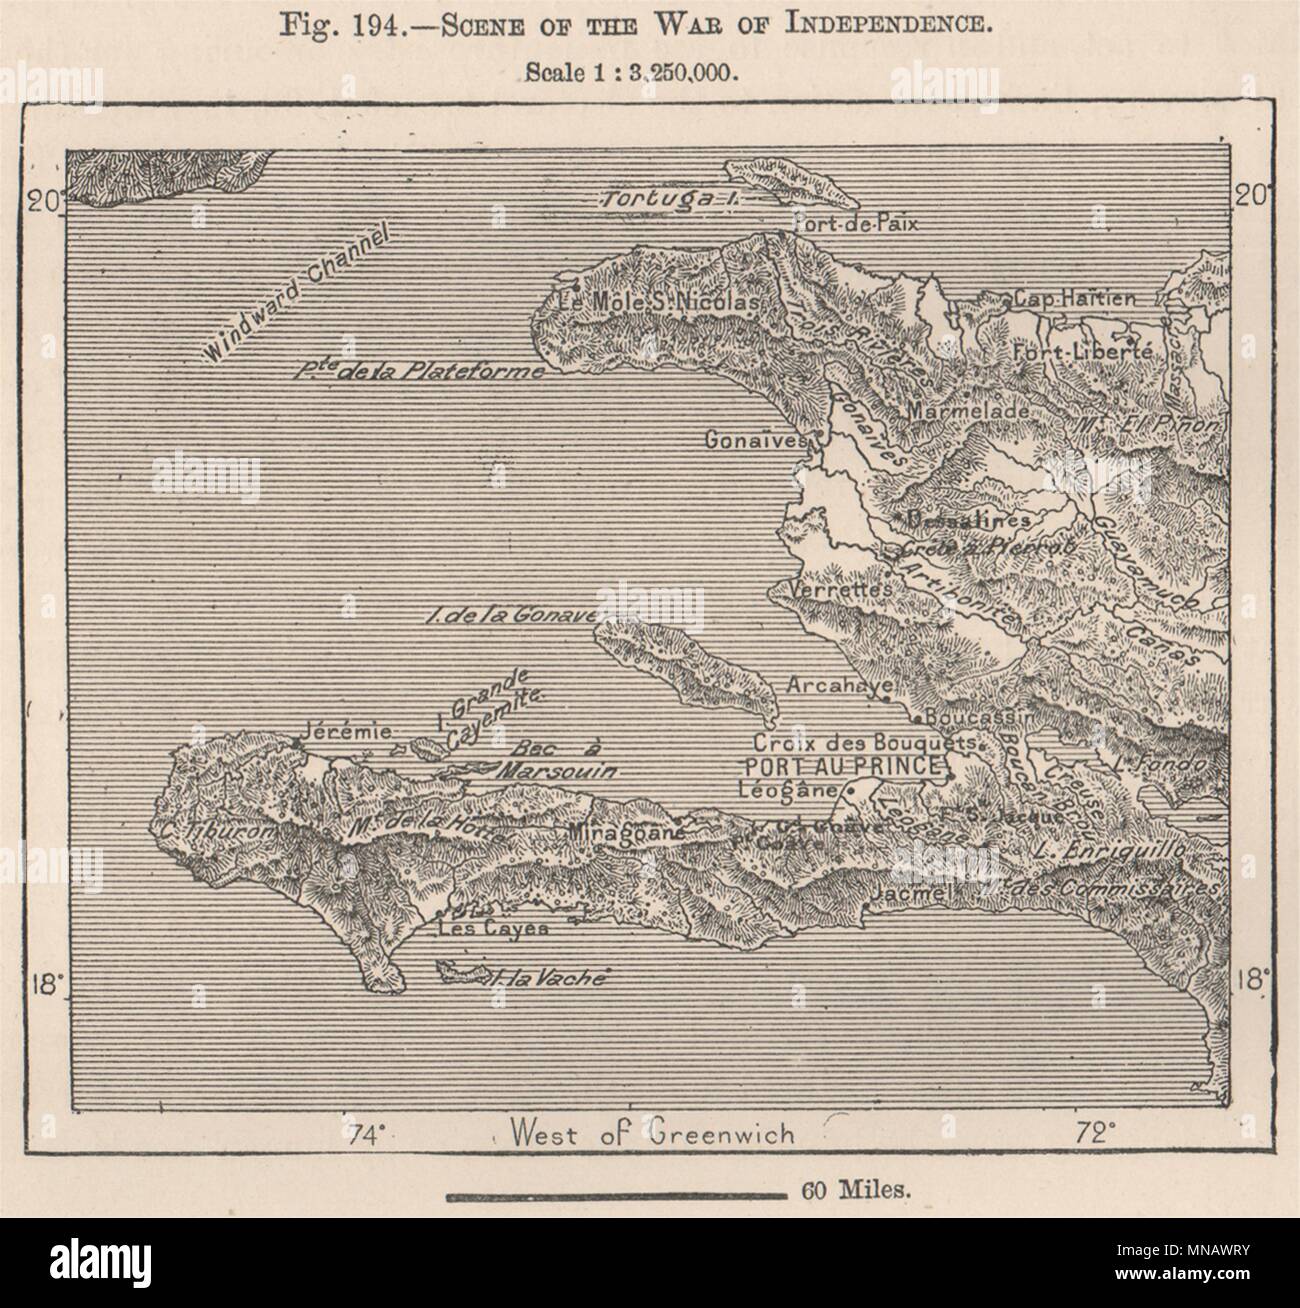 https://c8.alamy.com/comp/MNAWRY/scene-of-the-war-of-independence-haiti-hispaniola-1885-old-antique-map-chart-MNAWRY.jpg